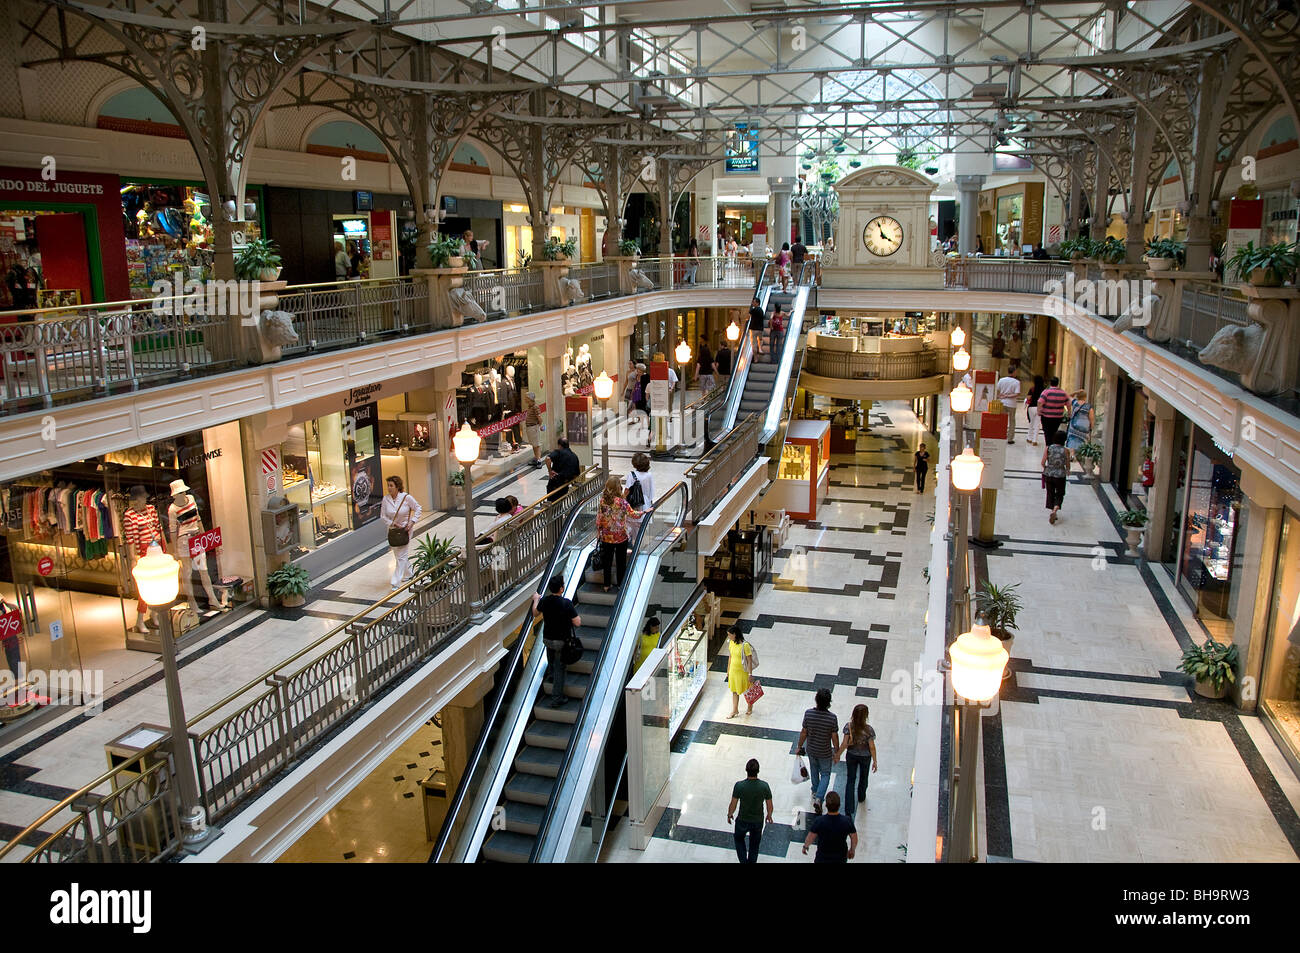 Buenos Aires Argentina Patio Bullrich Shopping Mall Stock Photo